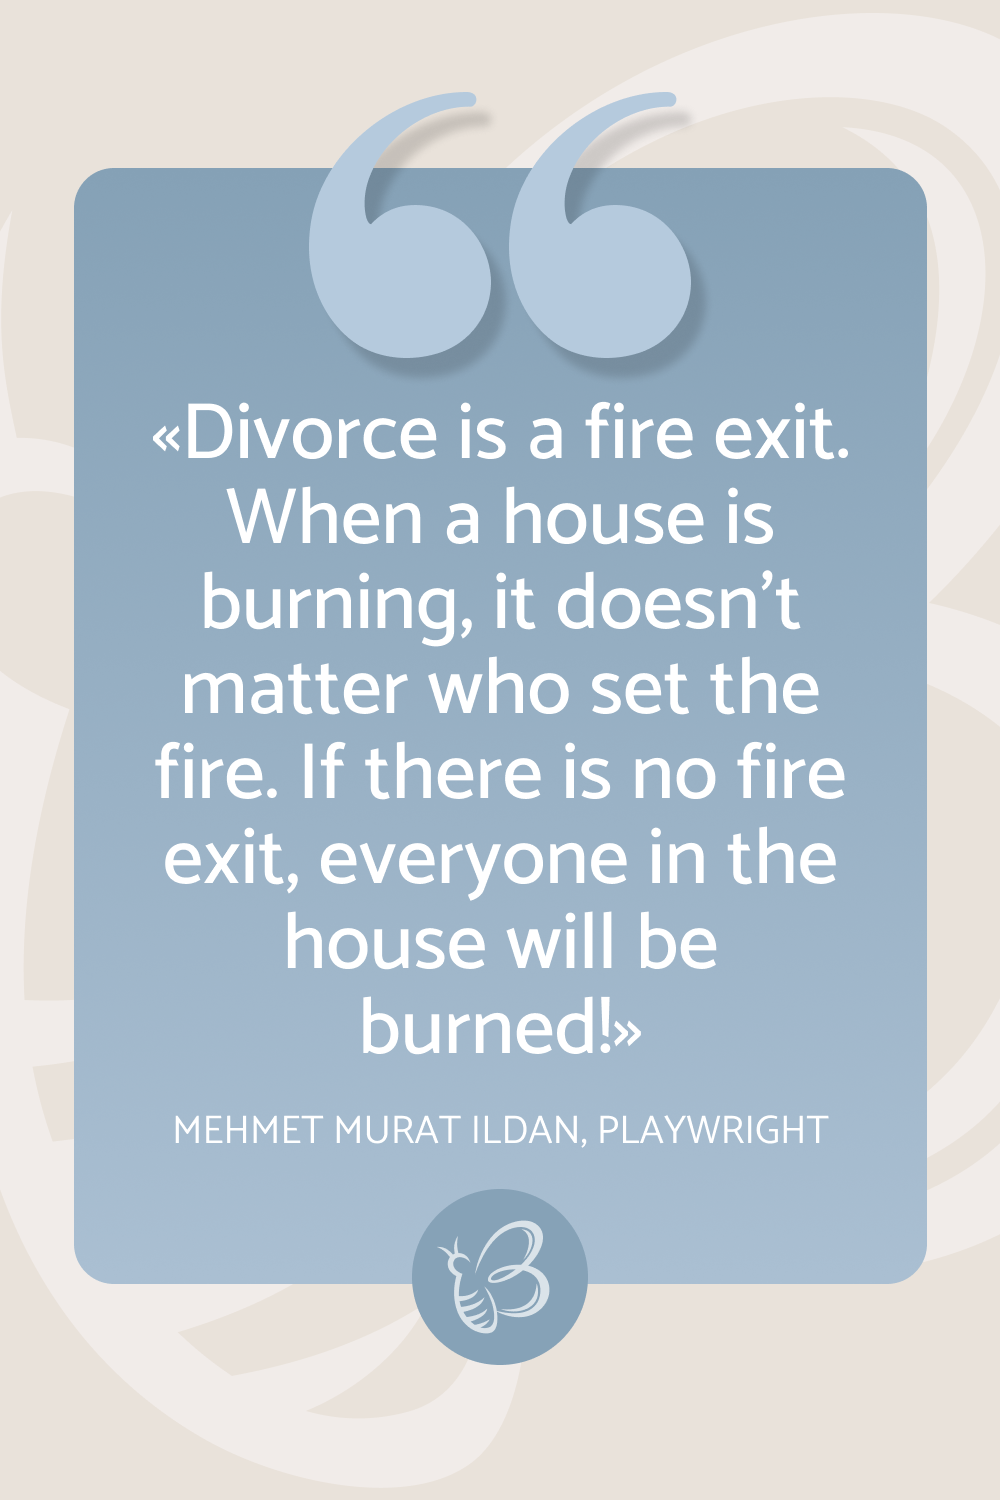 Divorce is a fire exit. When a house is burning, it doesn’t matter who set the fire. If there is no fire exit, everyone in the house will be burned! – Mehmet Murat Ildan, Playwright